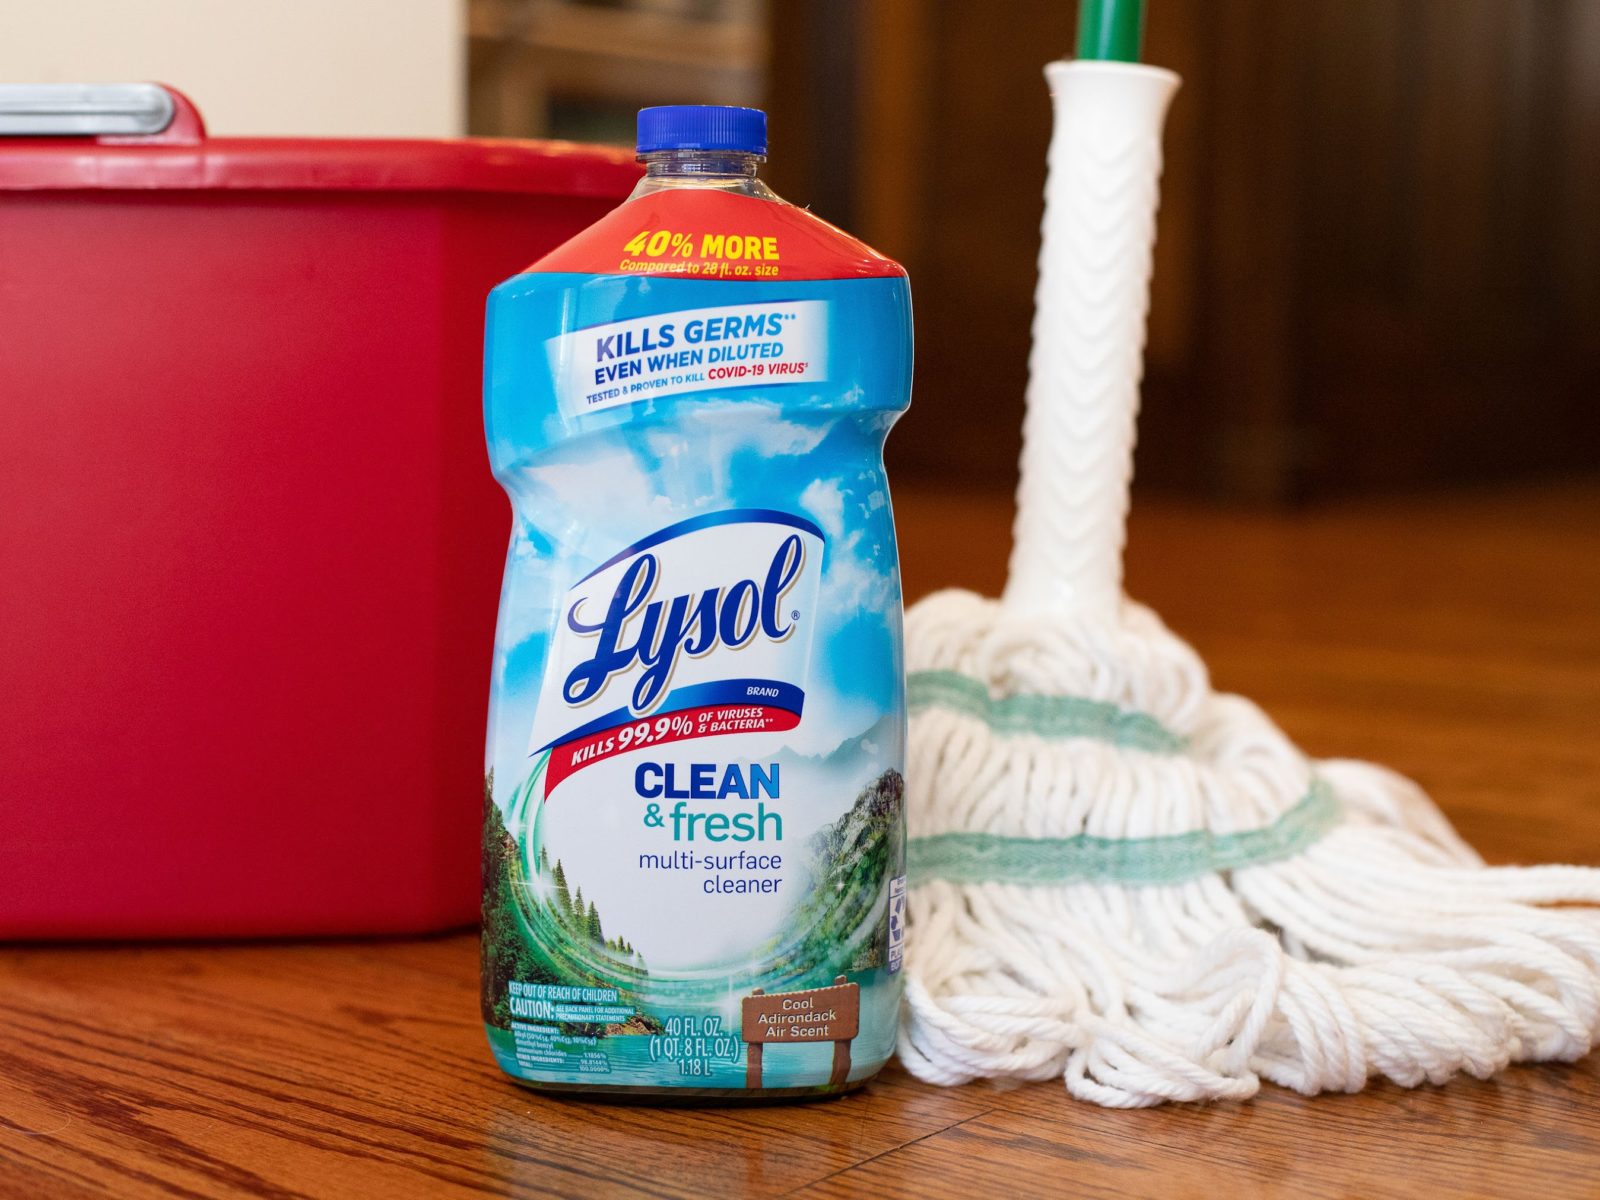 Lysol Disinfecting Wipes Or Multi-Purpose Cleaner As Low As $2.50 At Publix